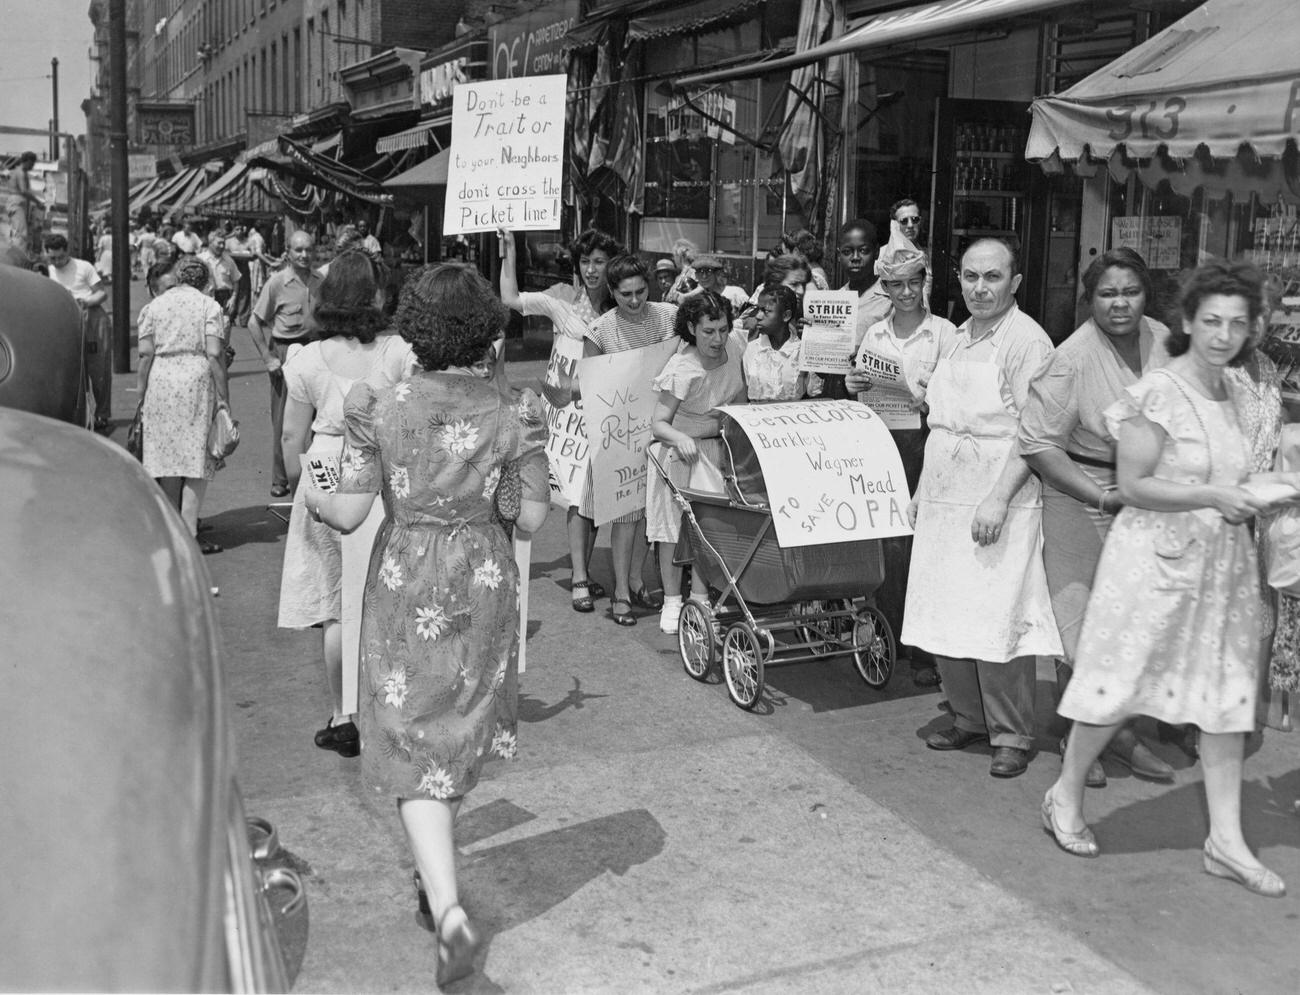 Women Protest Against High Meat Prices In Williamsburg, Brooklyn, Circa 1937.